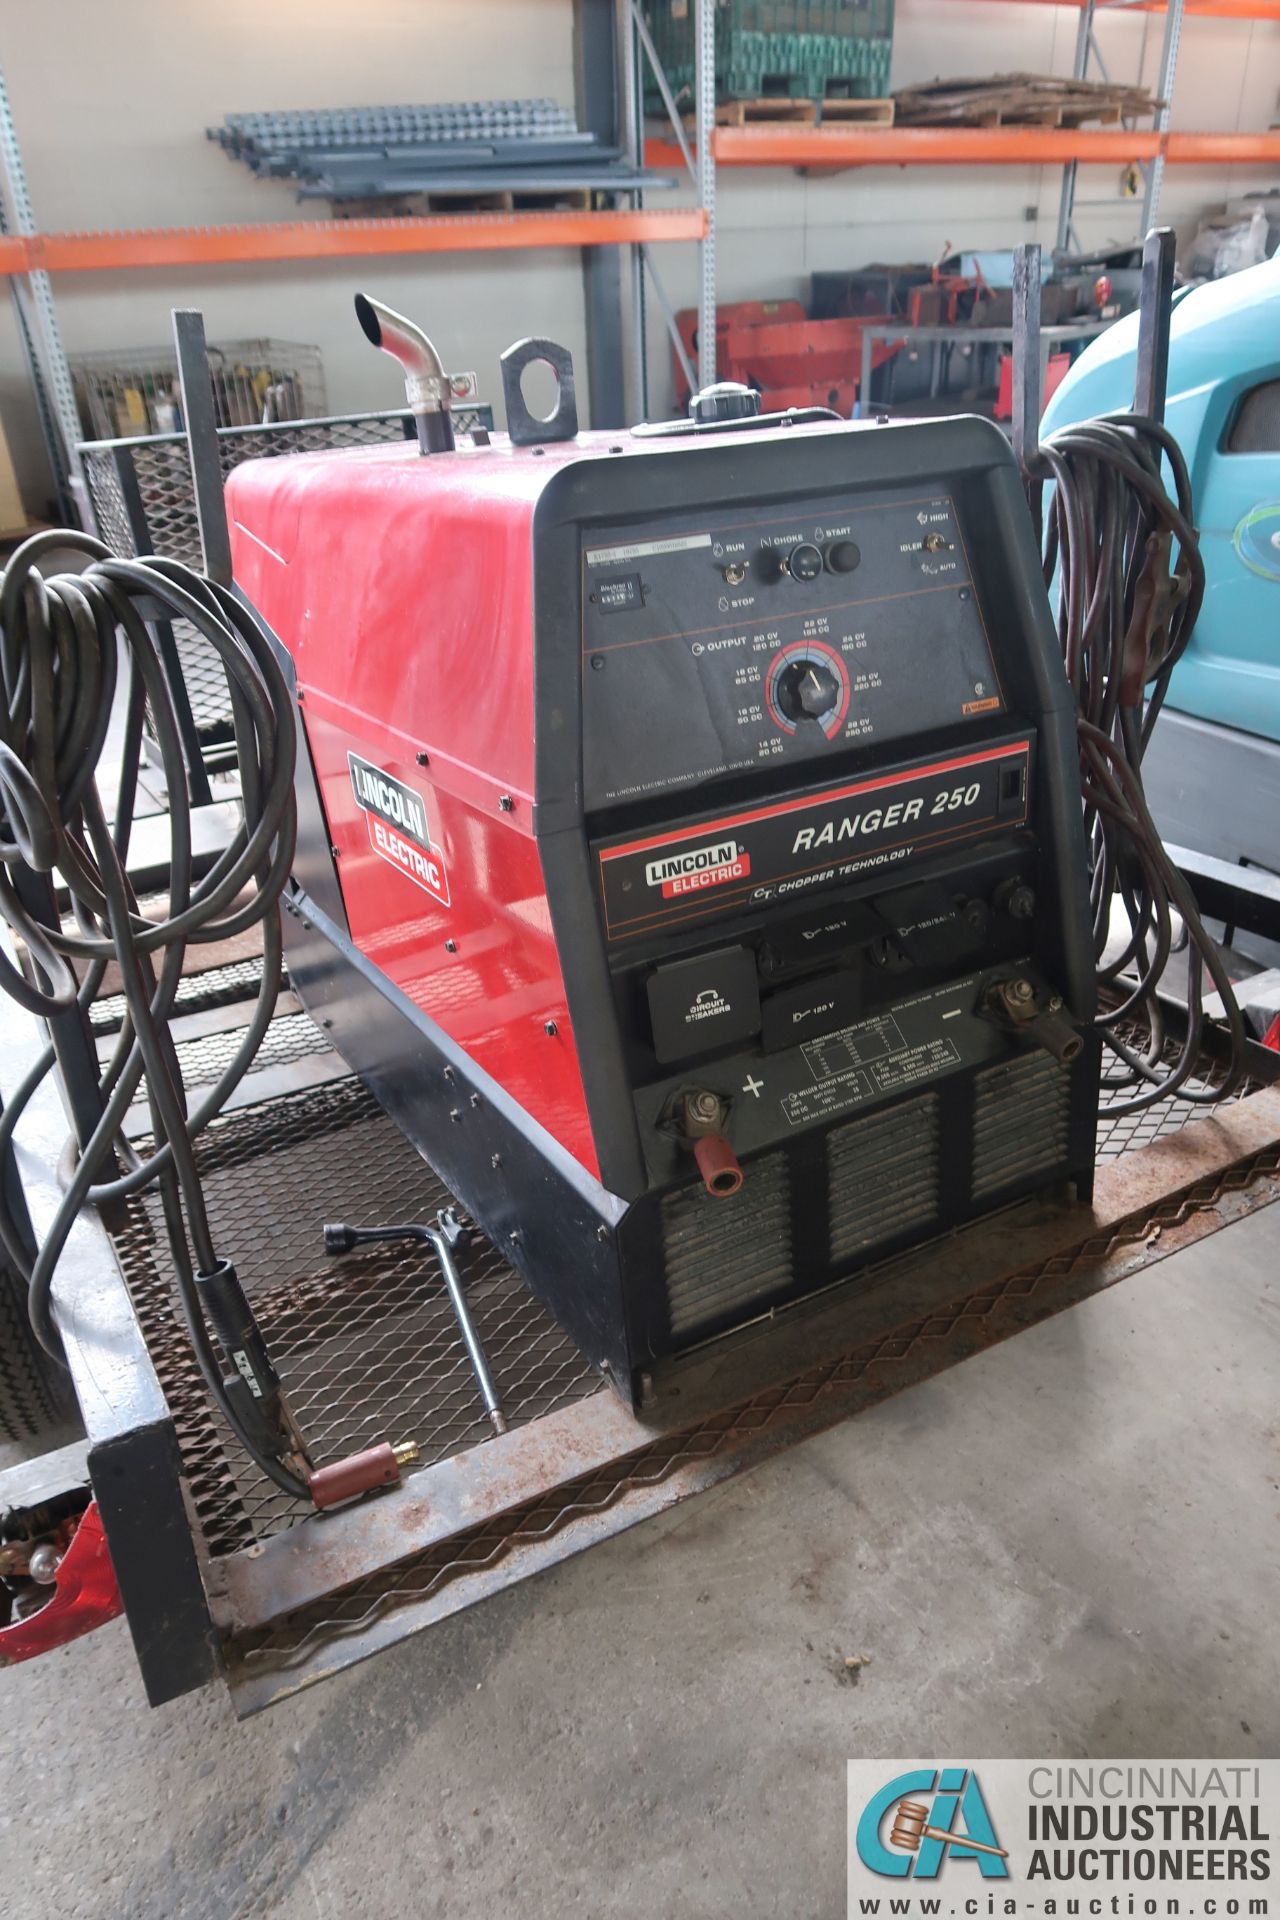 250-AMP LINCOLN ELECTRIC MODEL RANGER 250 TRAILER MOUNTED ARC WELDING POWER SOURCE; S/N U1020619592, - Image 3 of 9